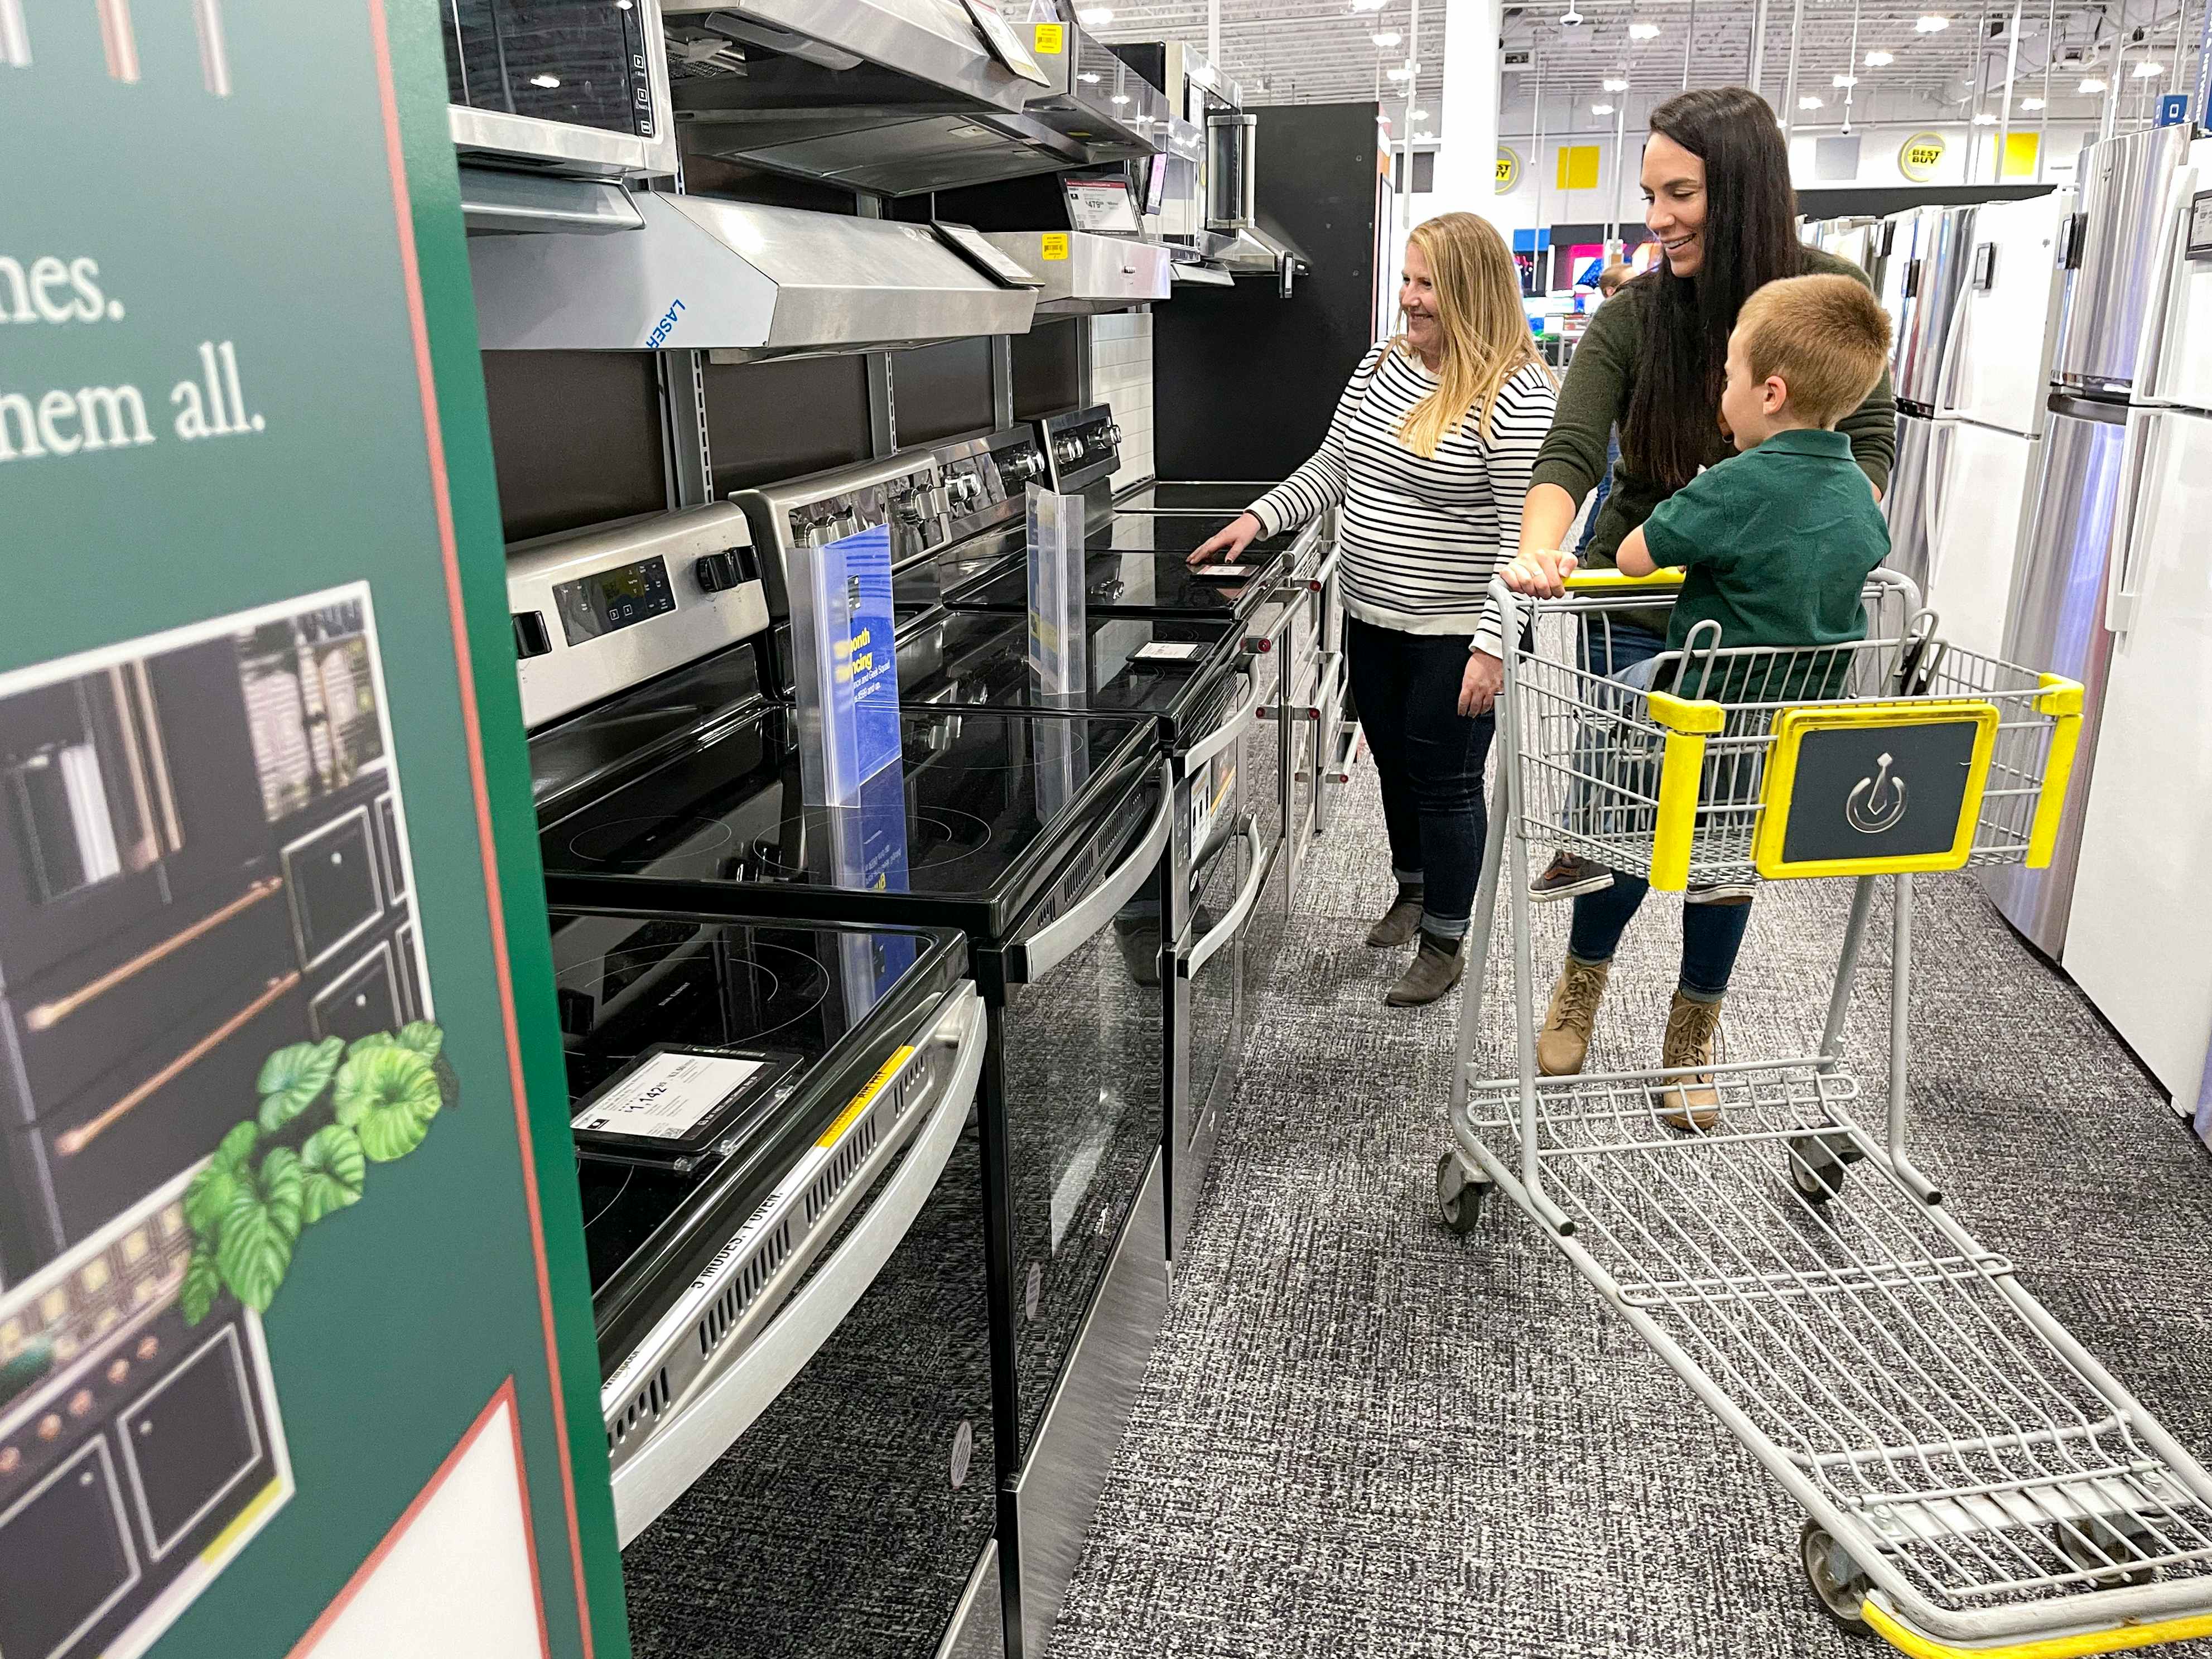 A group of people shopping in the appliance section at best buy.